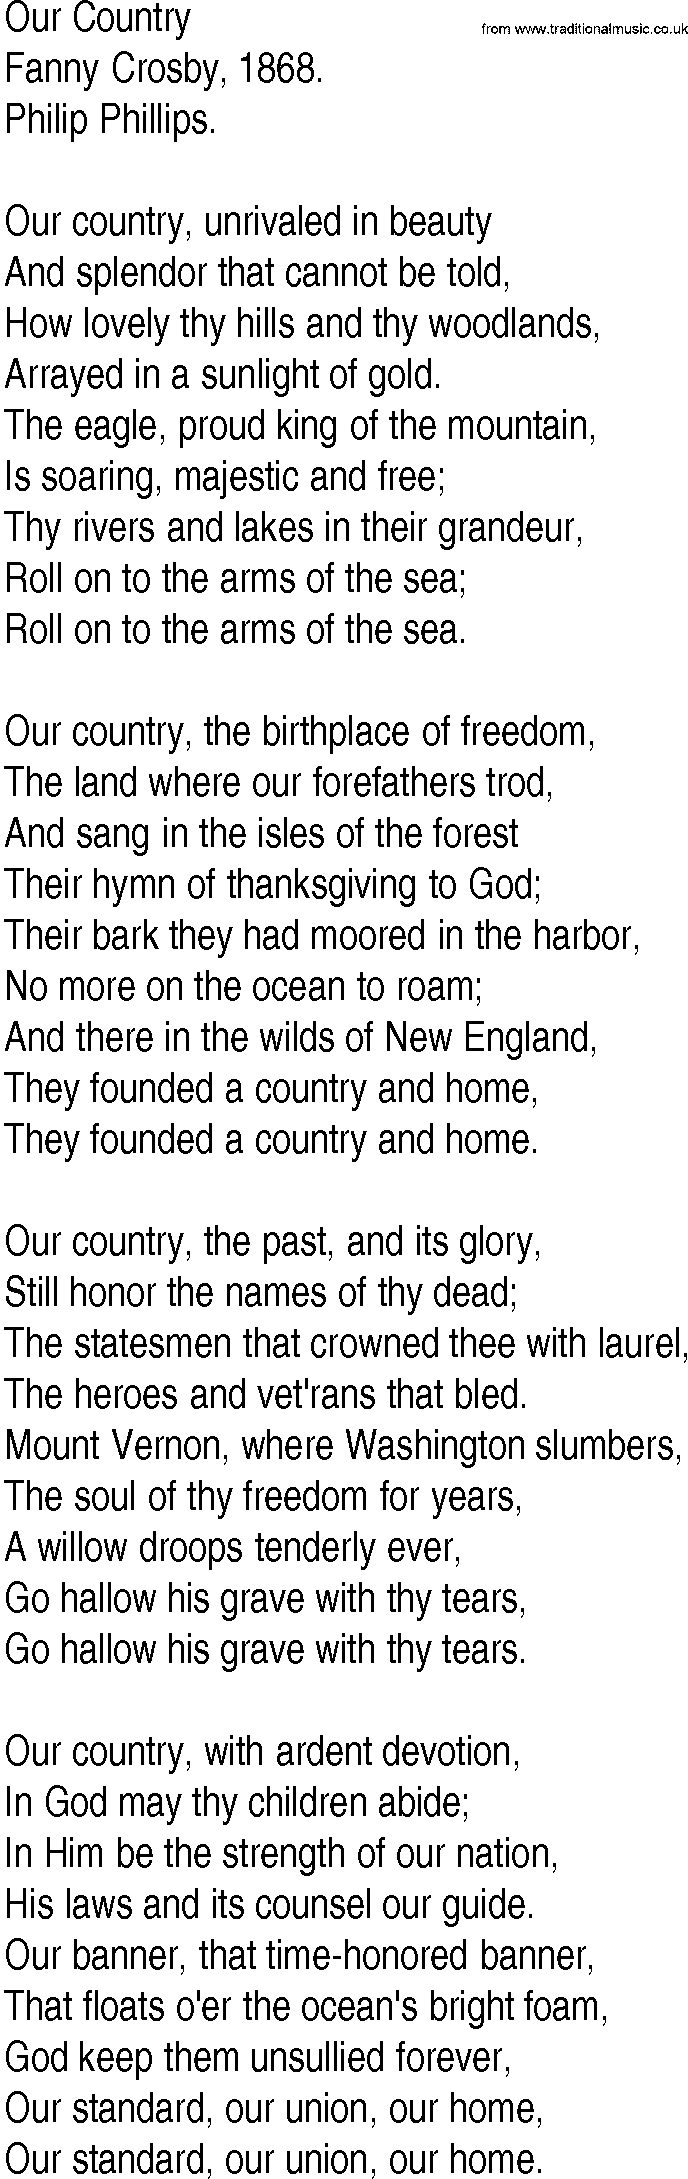 Hymn and Gospel Song: Our Country by Fanny Crosby lyrics